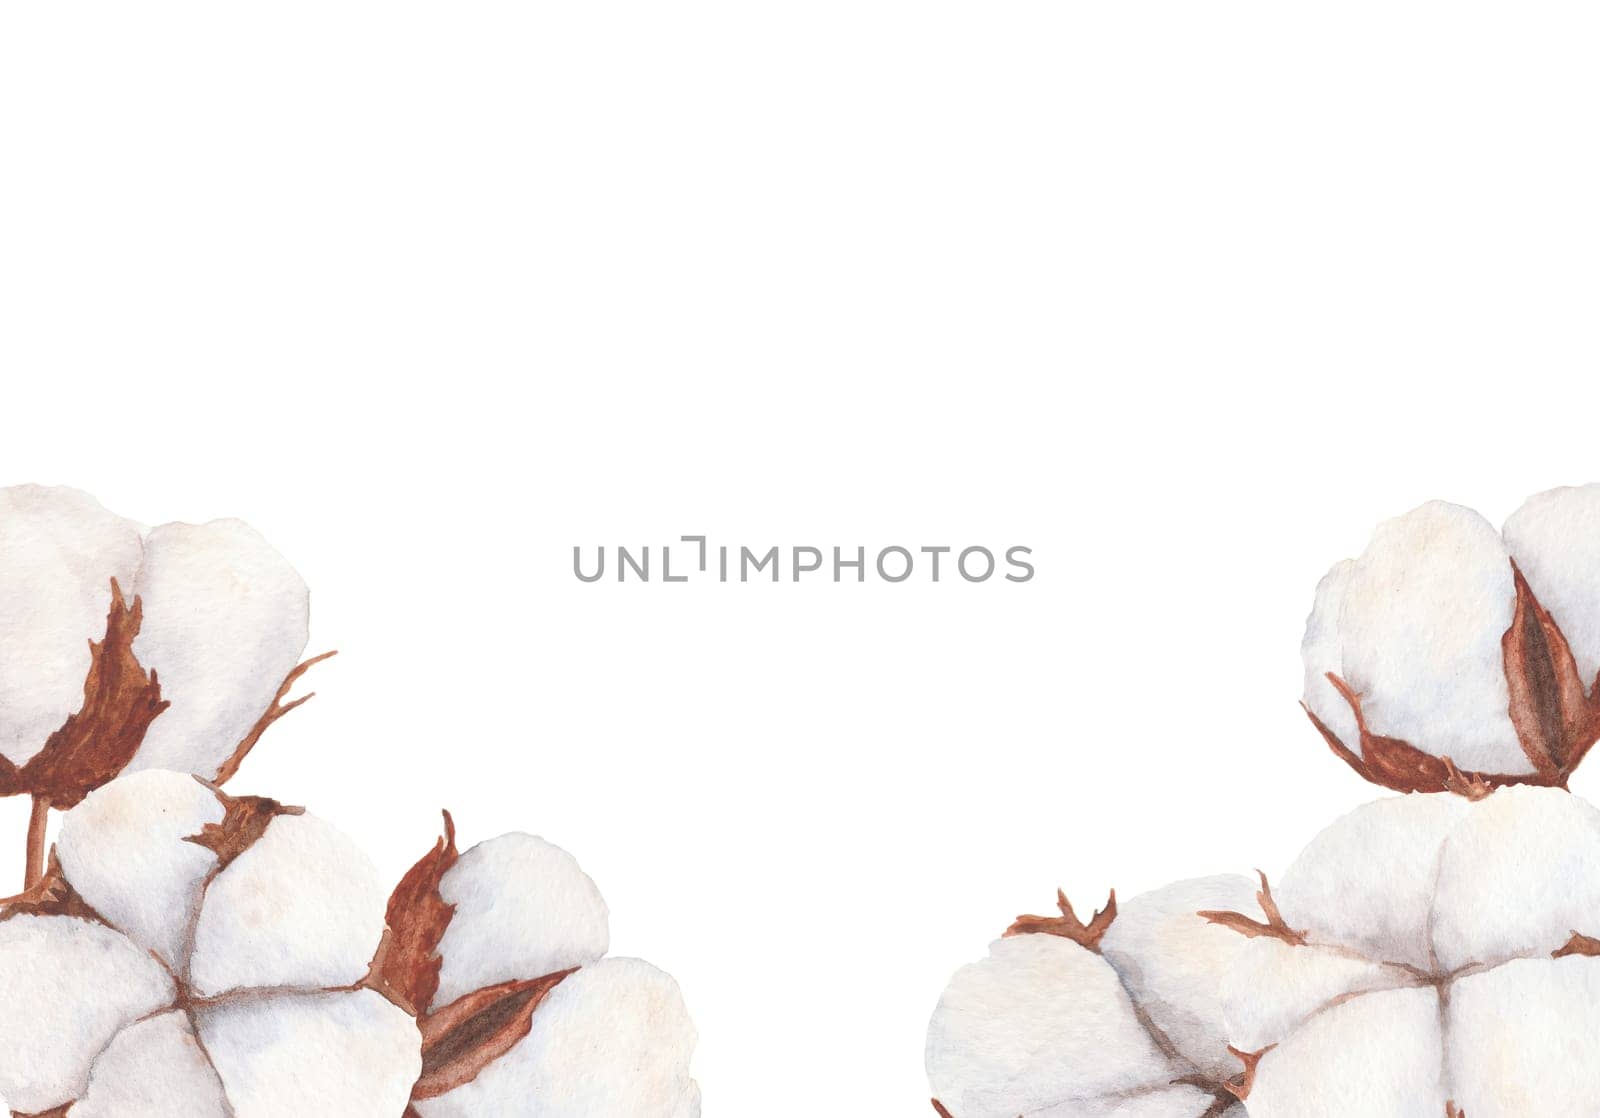 Cotton bolls illustration isolated on white background. Hand-drawn watercolor drawing. Suitable for use in the design of labels, cards, invitations